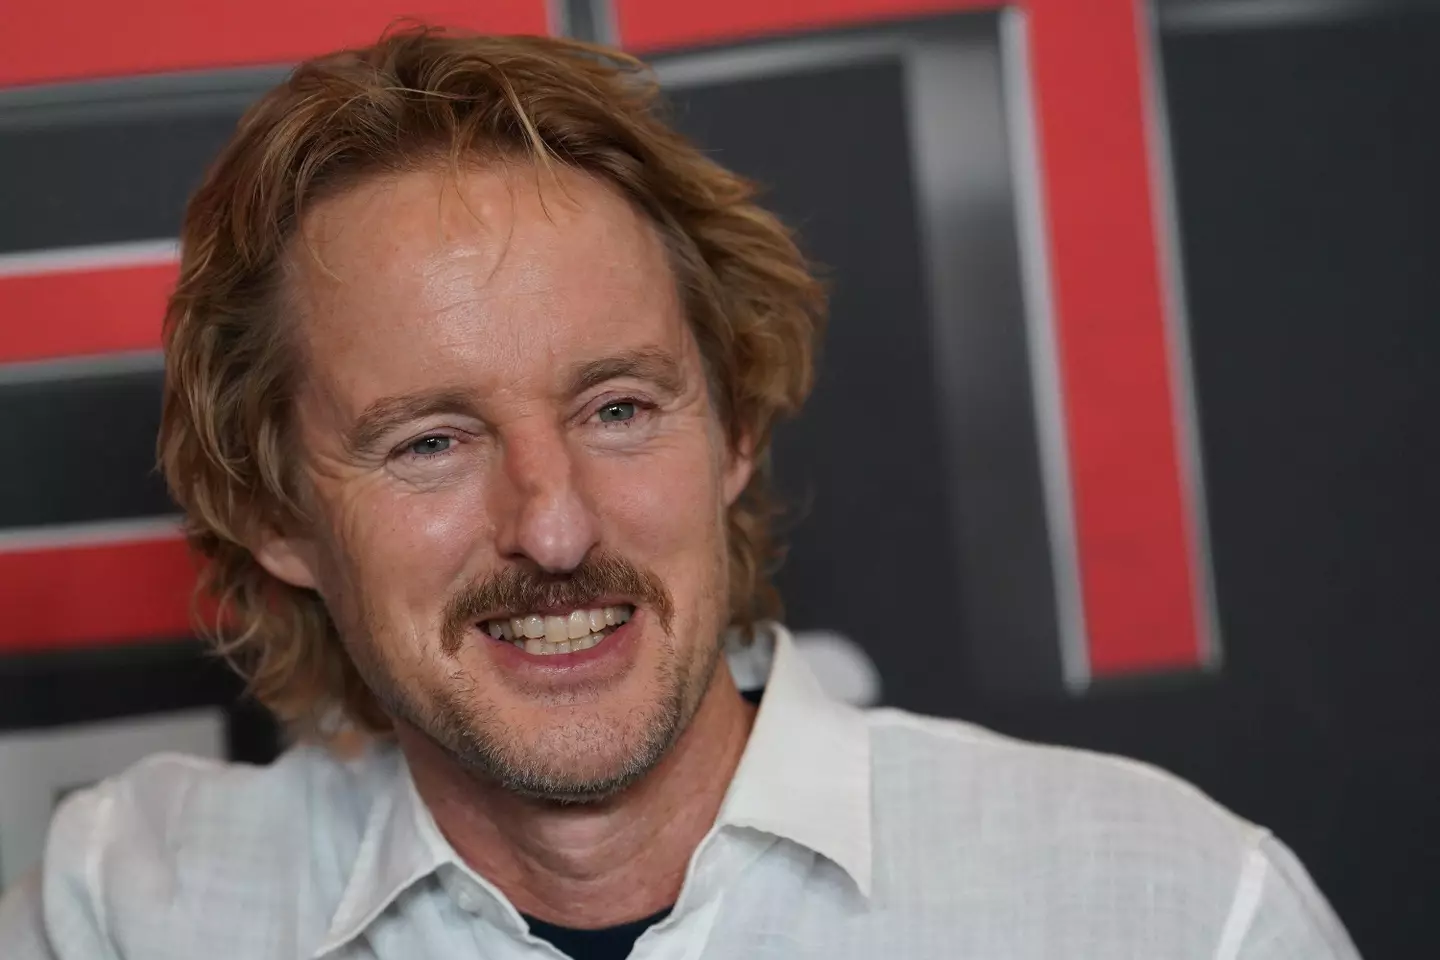 Owen Wilson has said 'wow' in 27 of his movies.